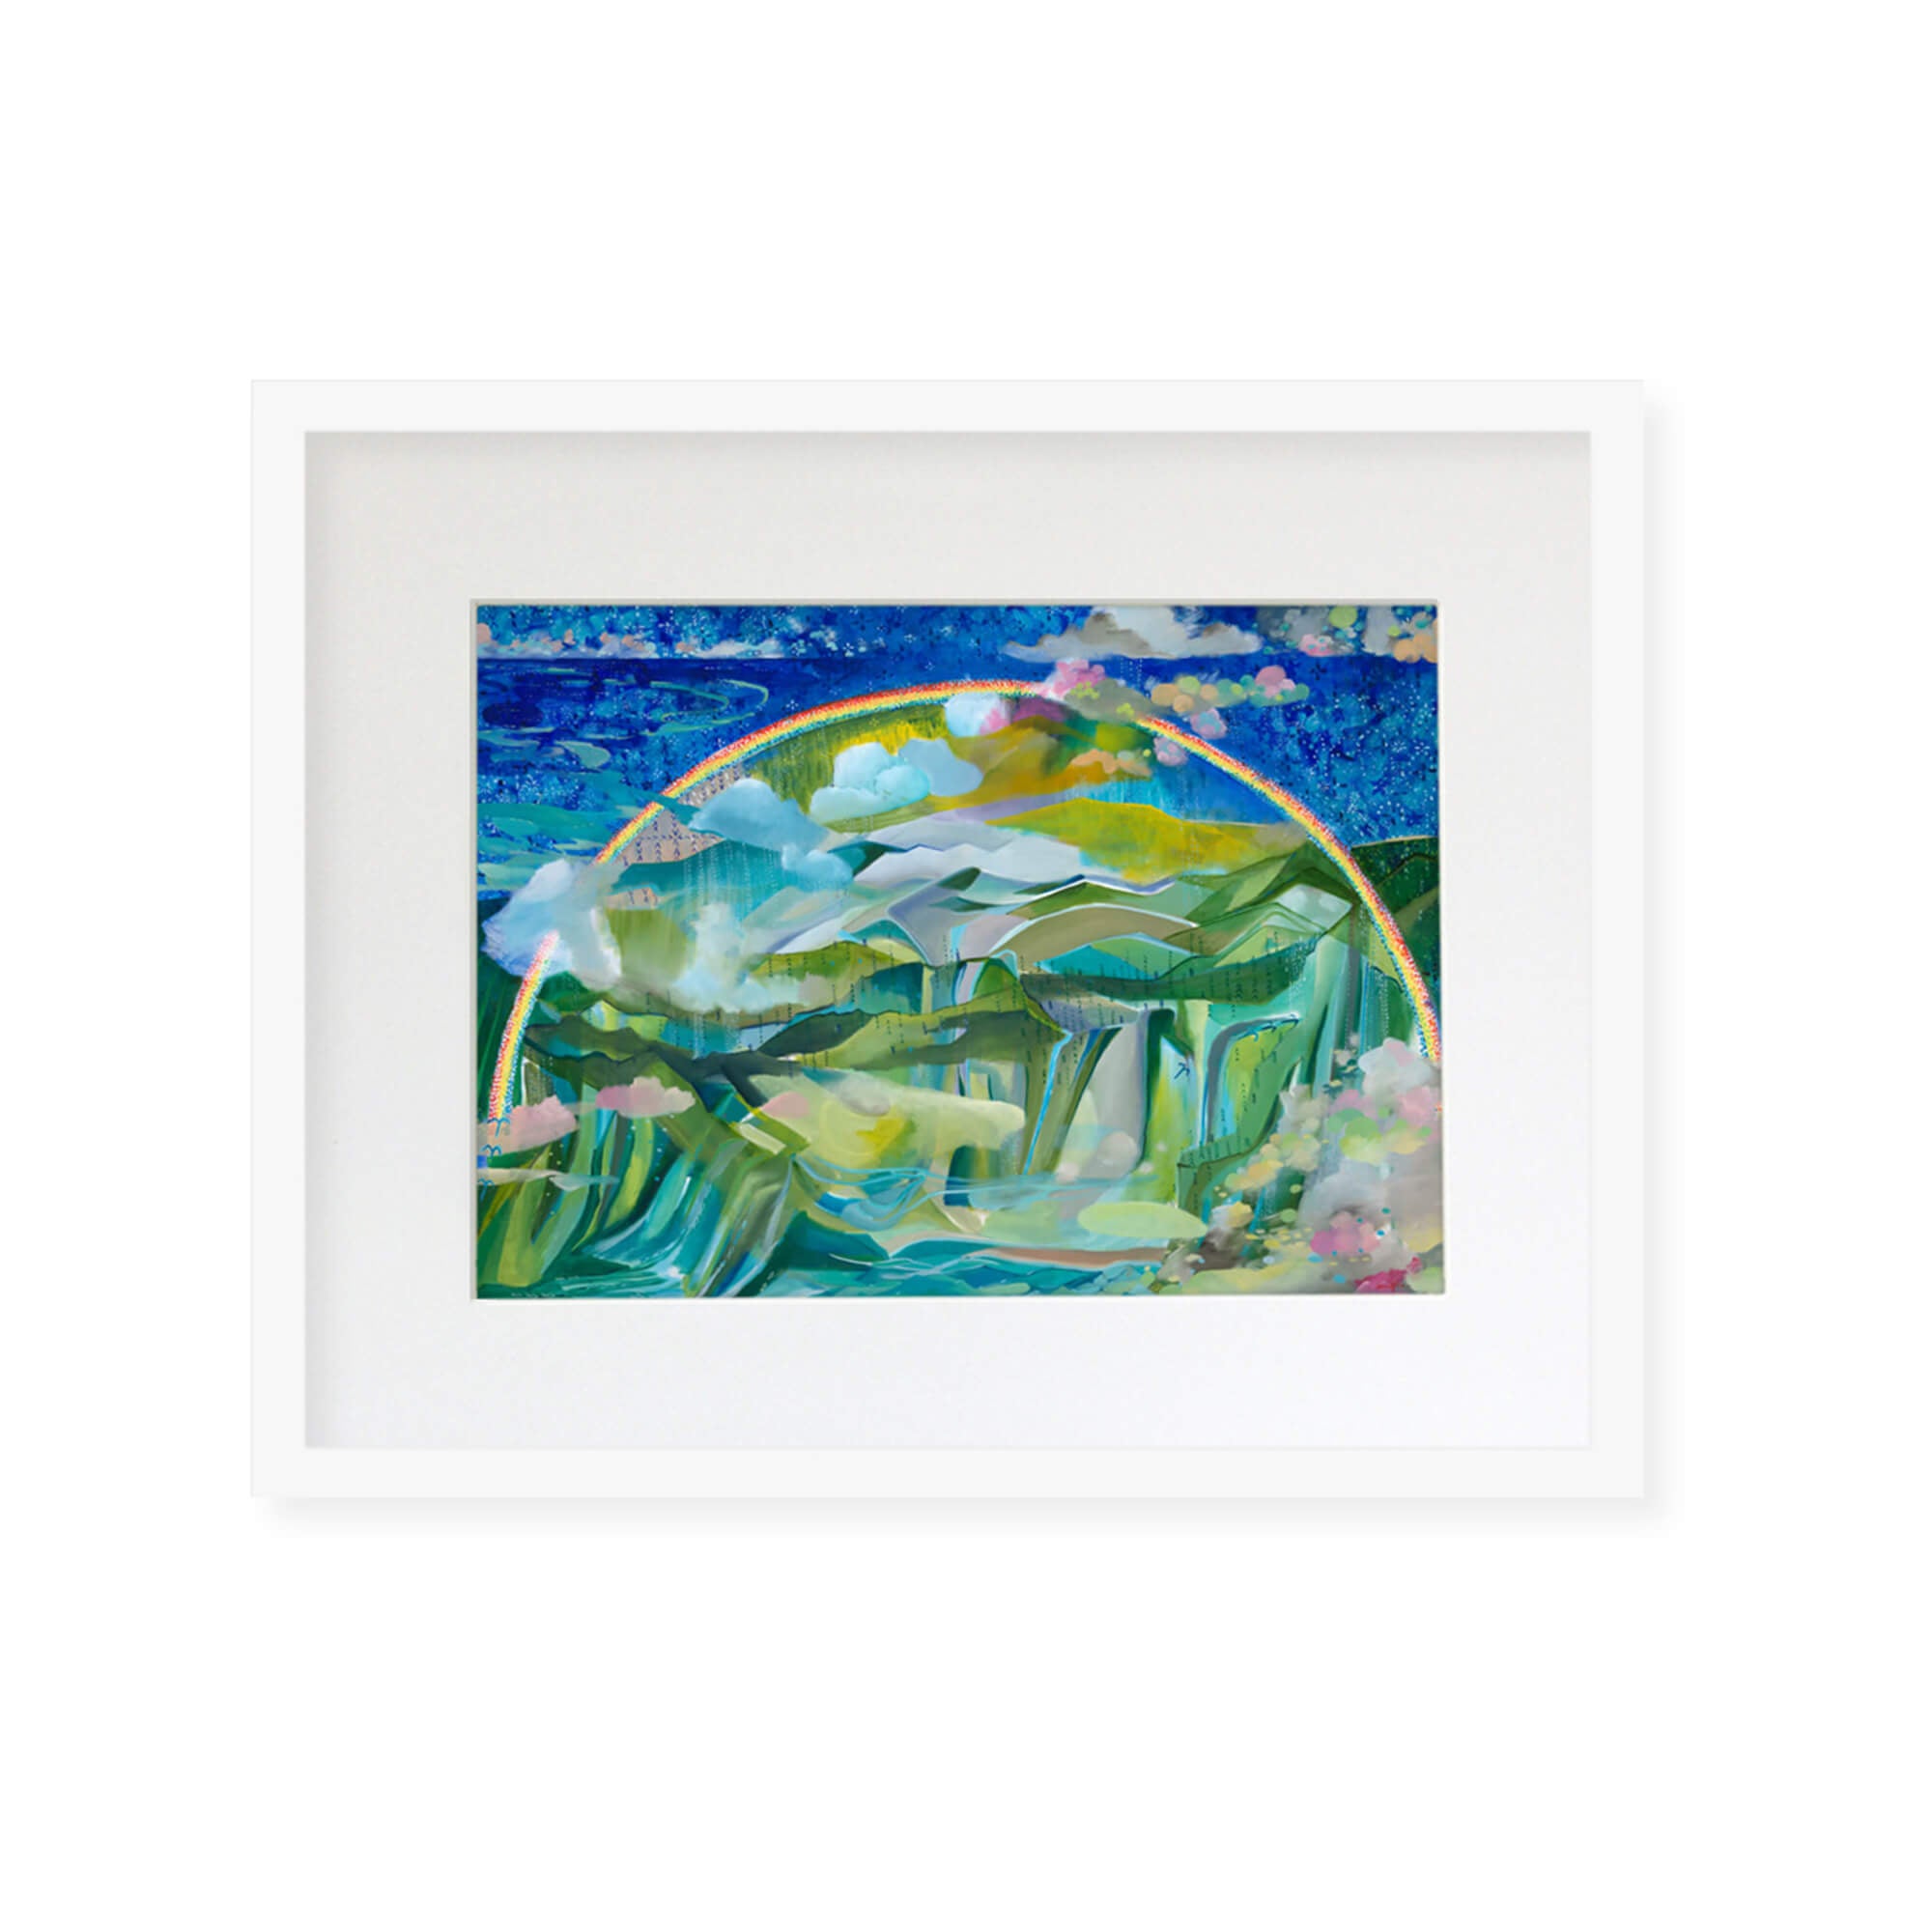 Framed matted art print of an abstract landscape with a rainbow over the mountains by Hawaii artist Saumolia Puapuaga 